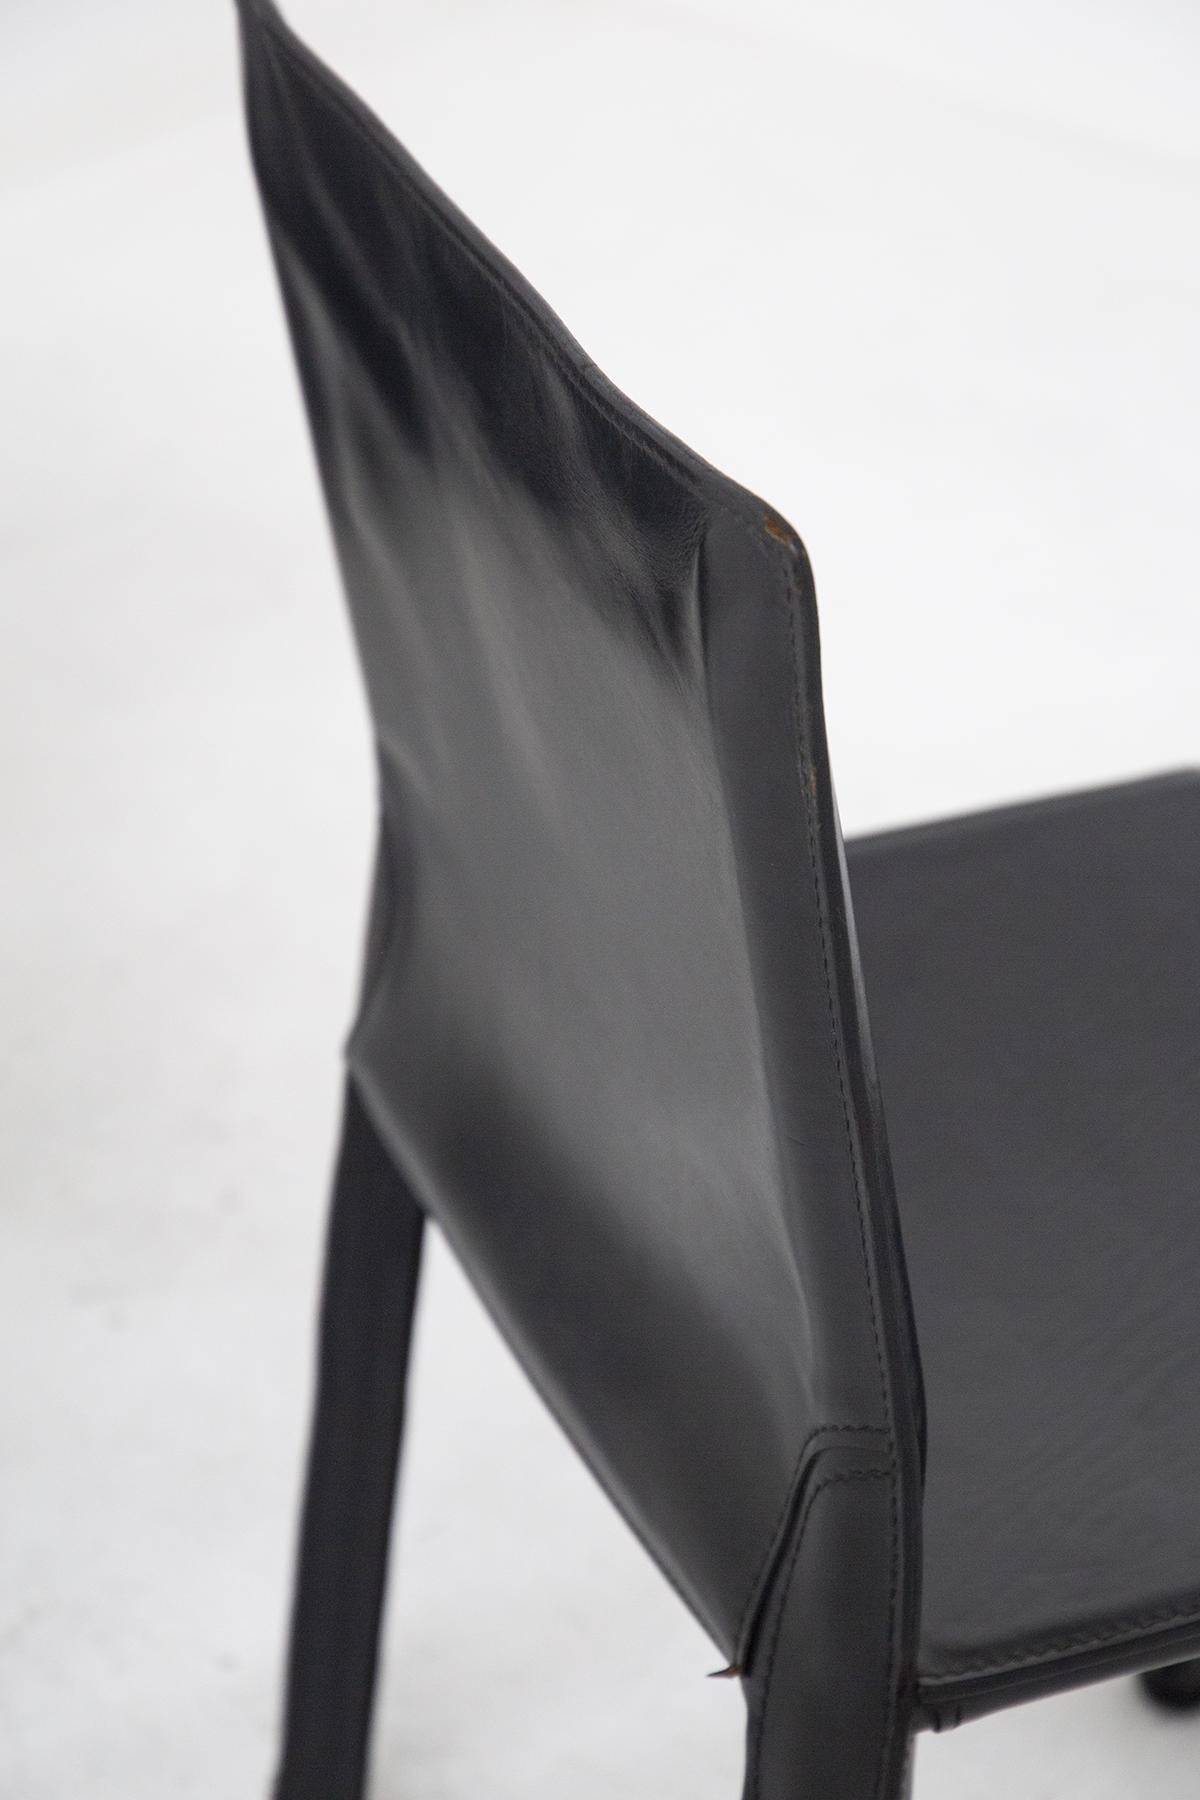 Black Leather Chairs by Mario Bellini for Cassina 6